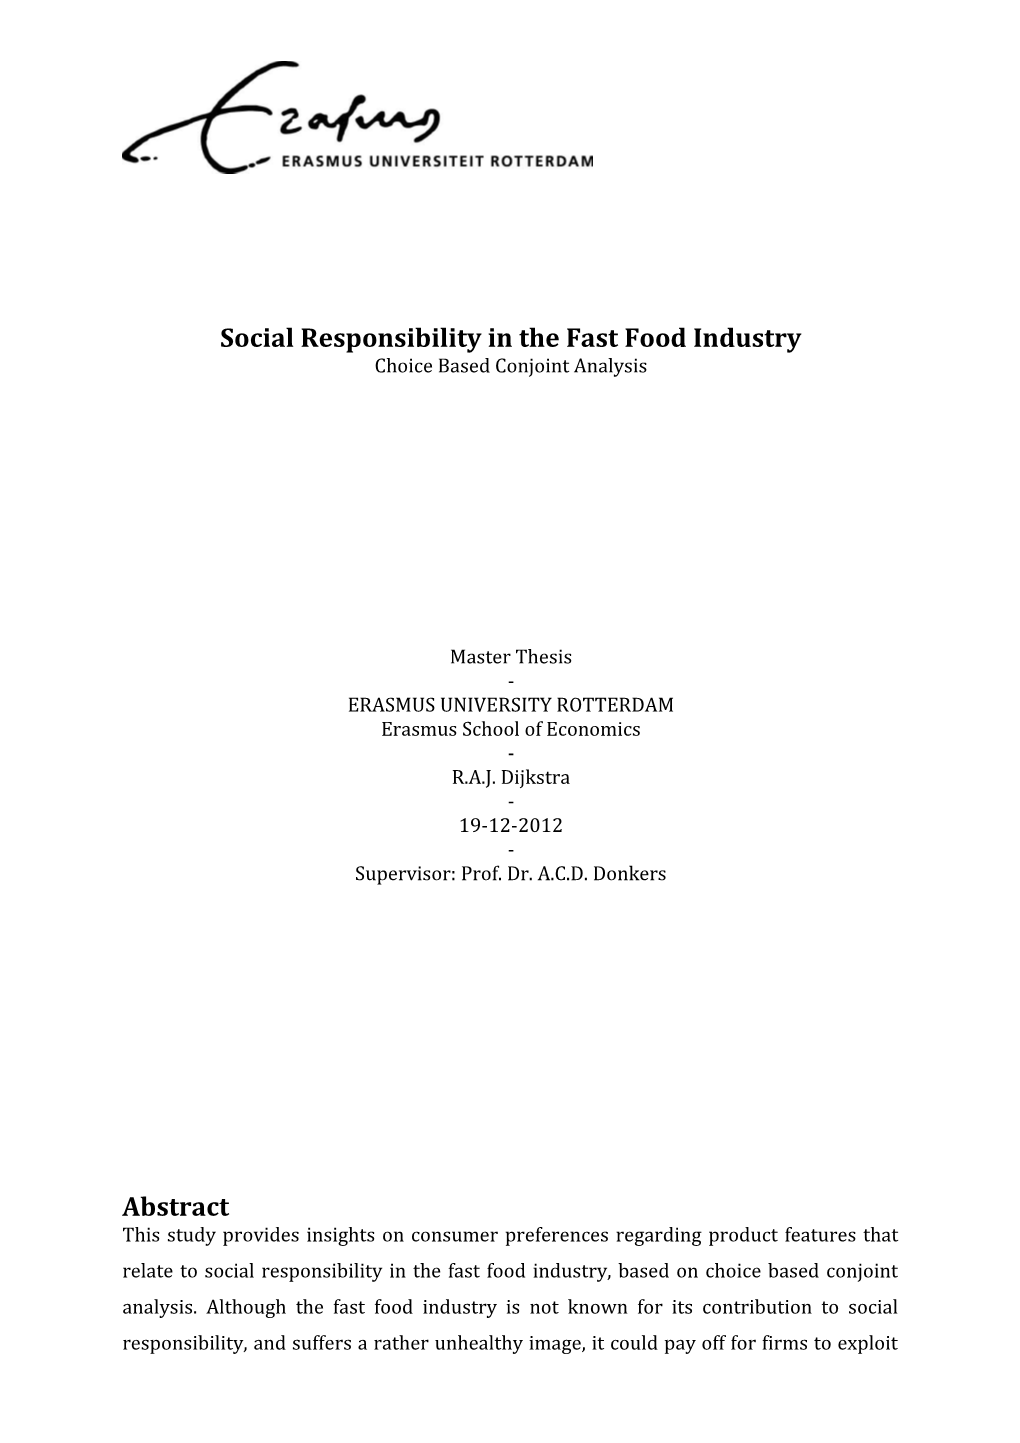 Social Responsibility in the Fast Food Industry